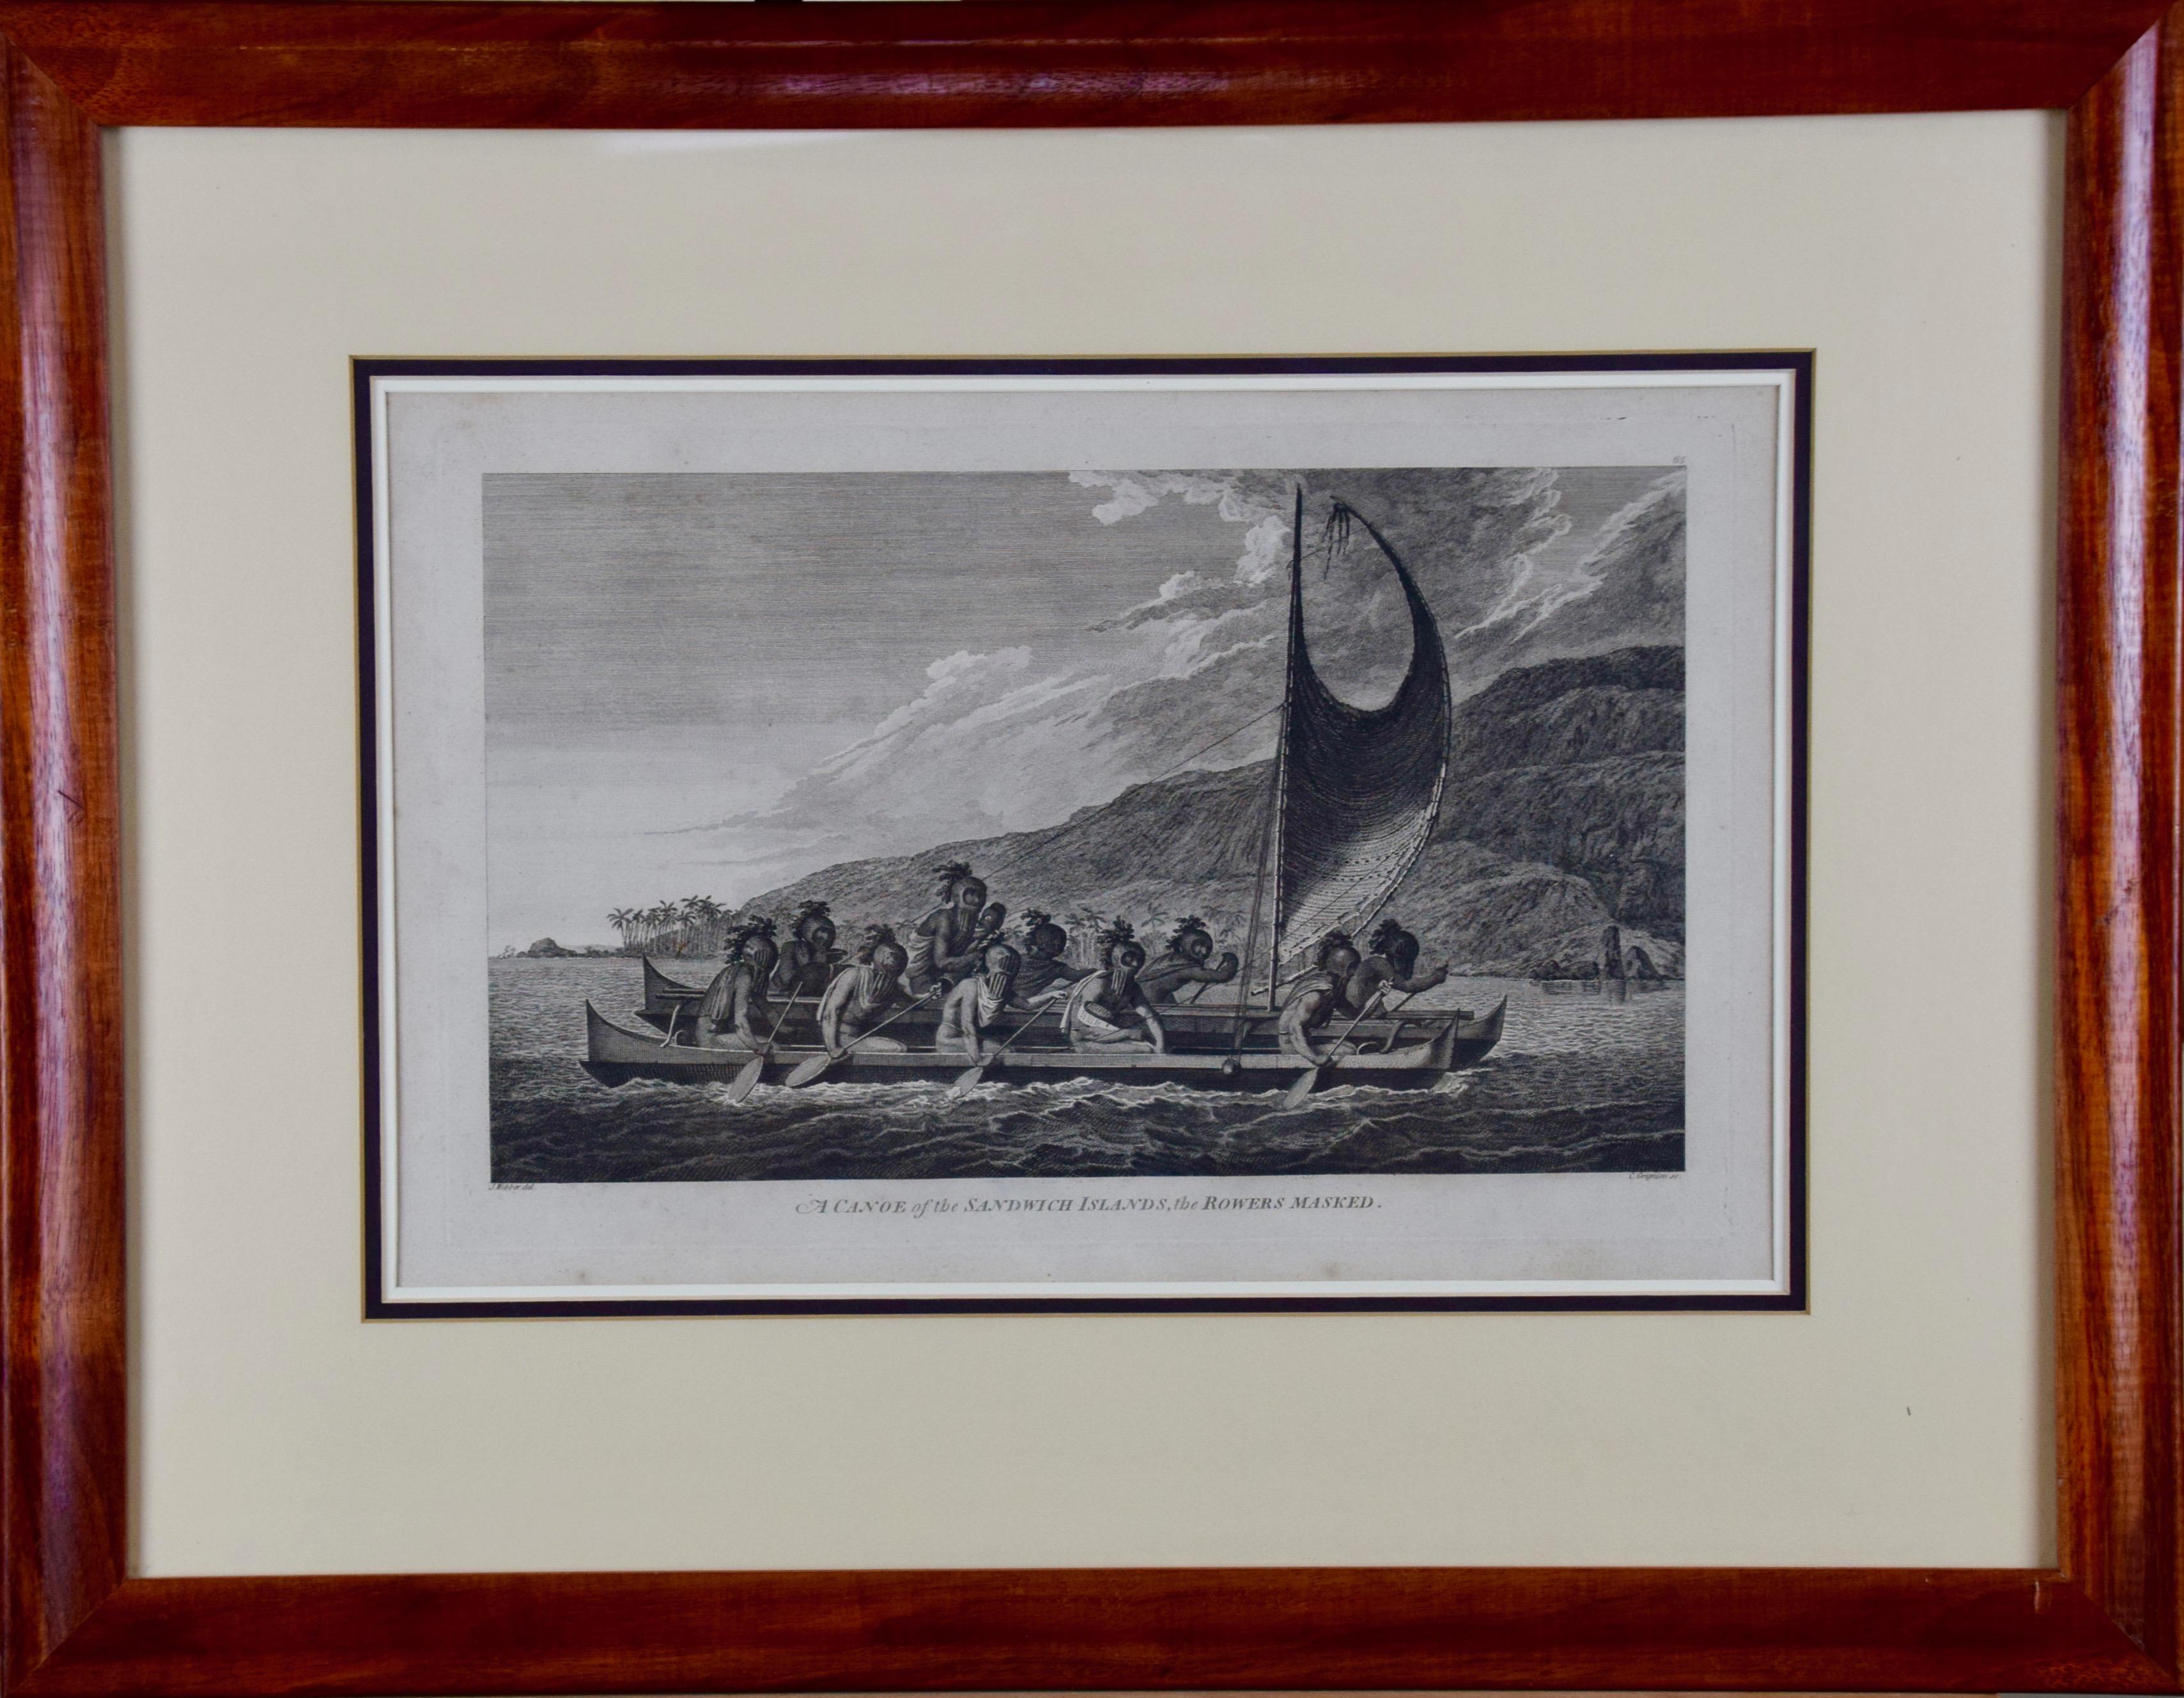 A Group of Four 18th Century Engravings from Captain Cook's 3rd Voyage Journal - Print by John Webber